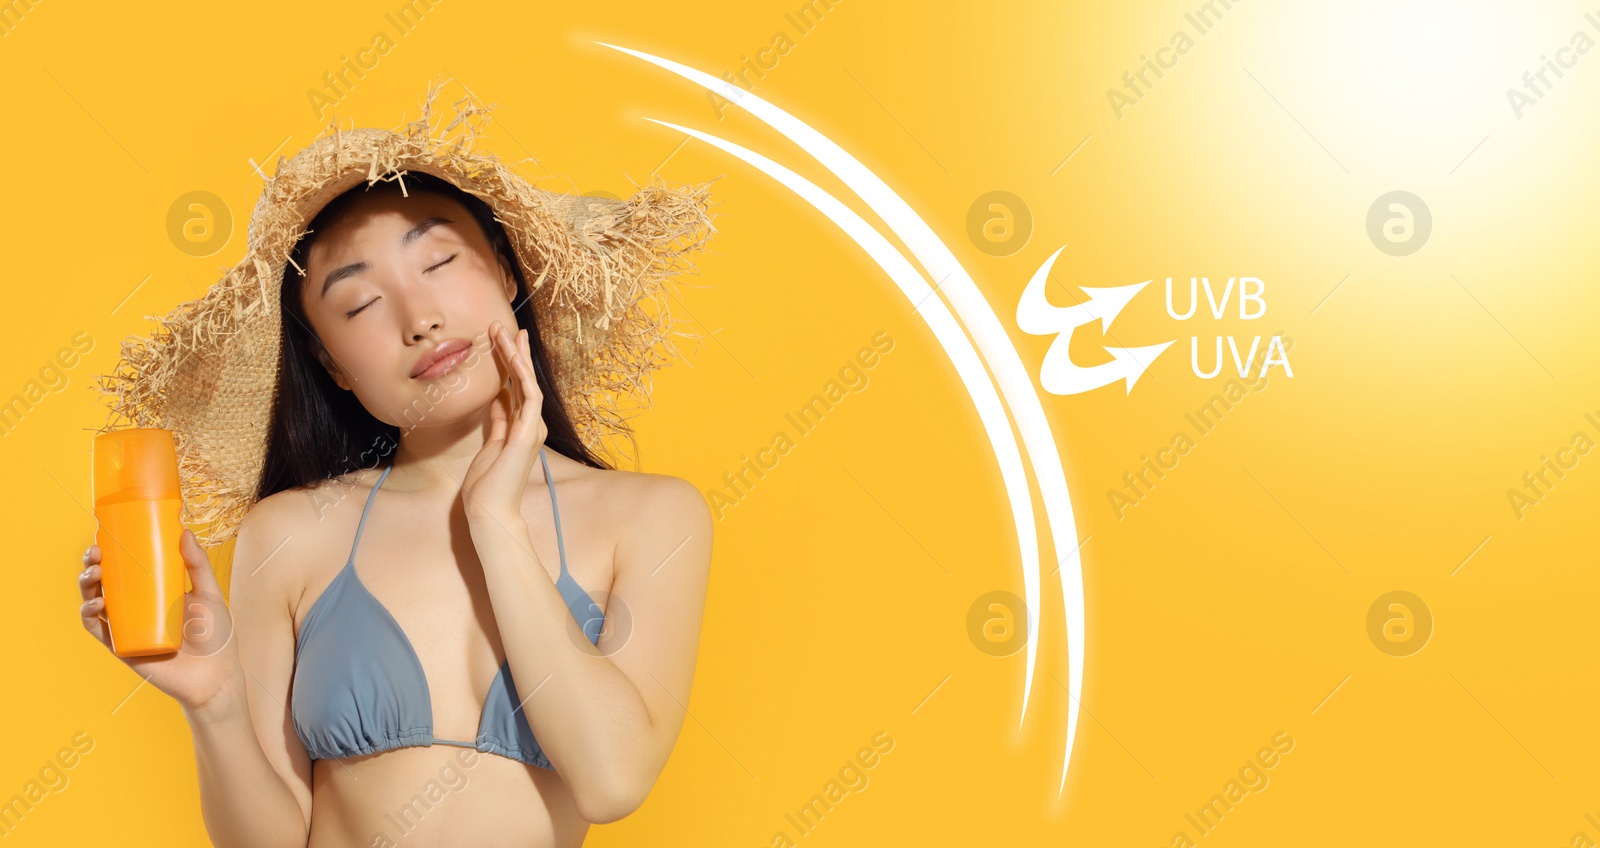 Image of Sun protection product as barrier against UVA and UVB, banner design. Beautiful young woman applying sunscreen onto face against orange background